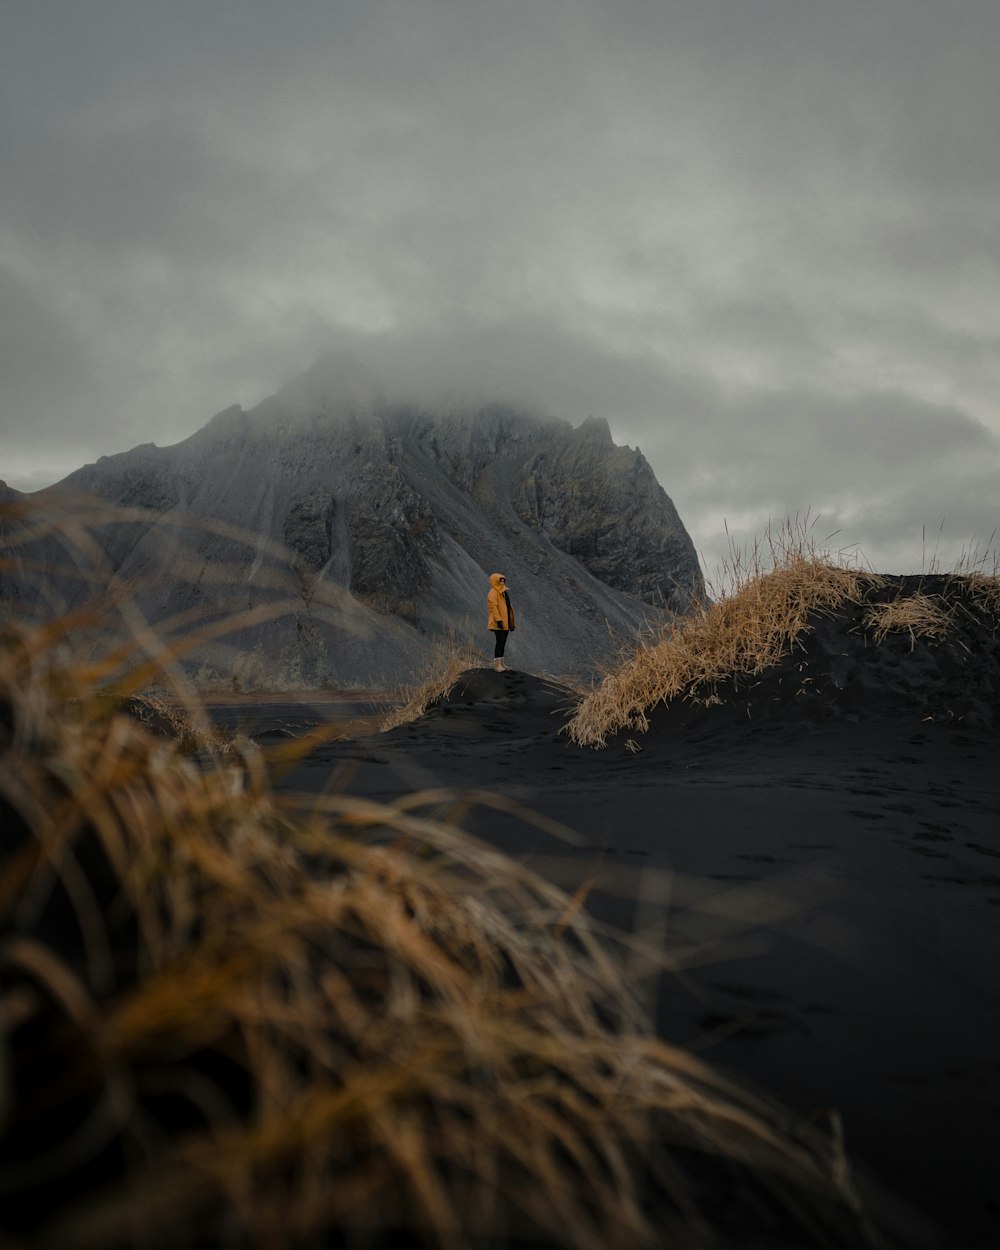 a person walking on a path in a foggy landscape